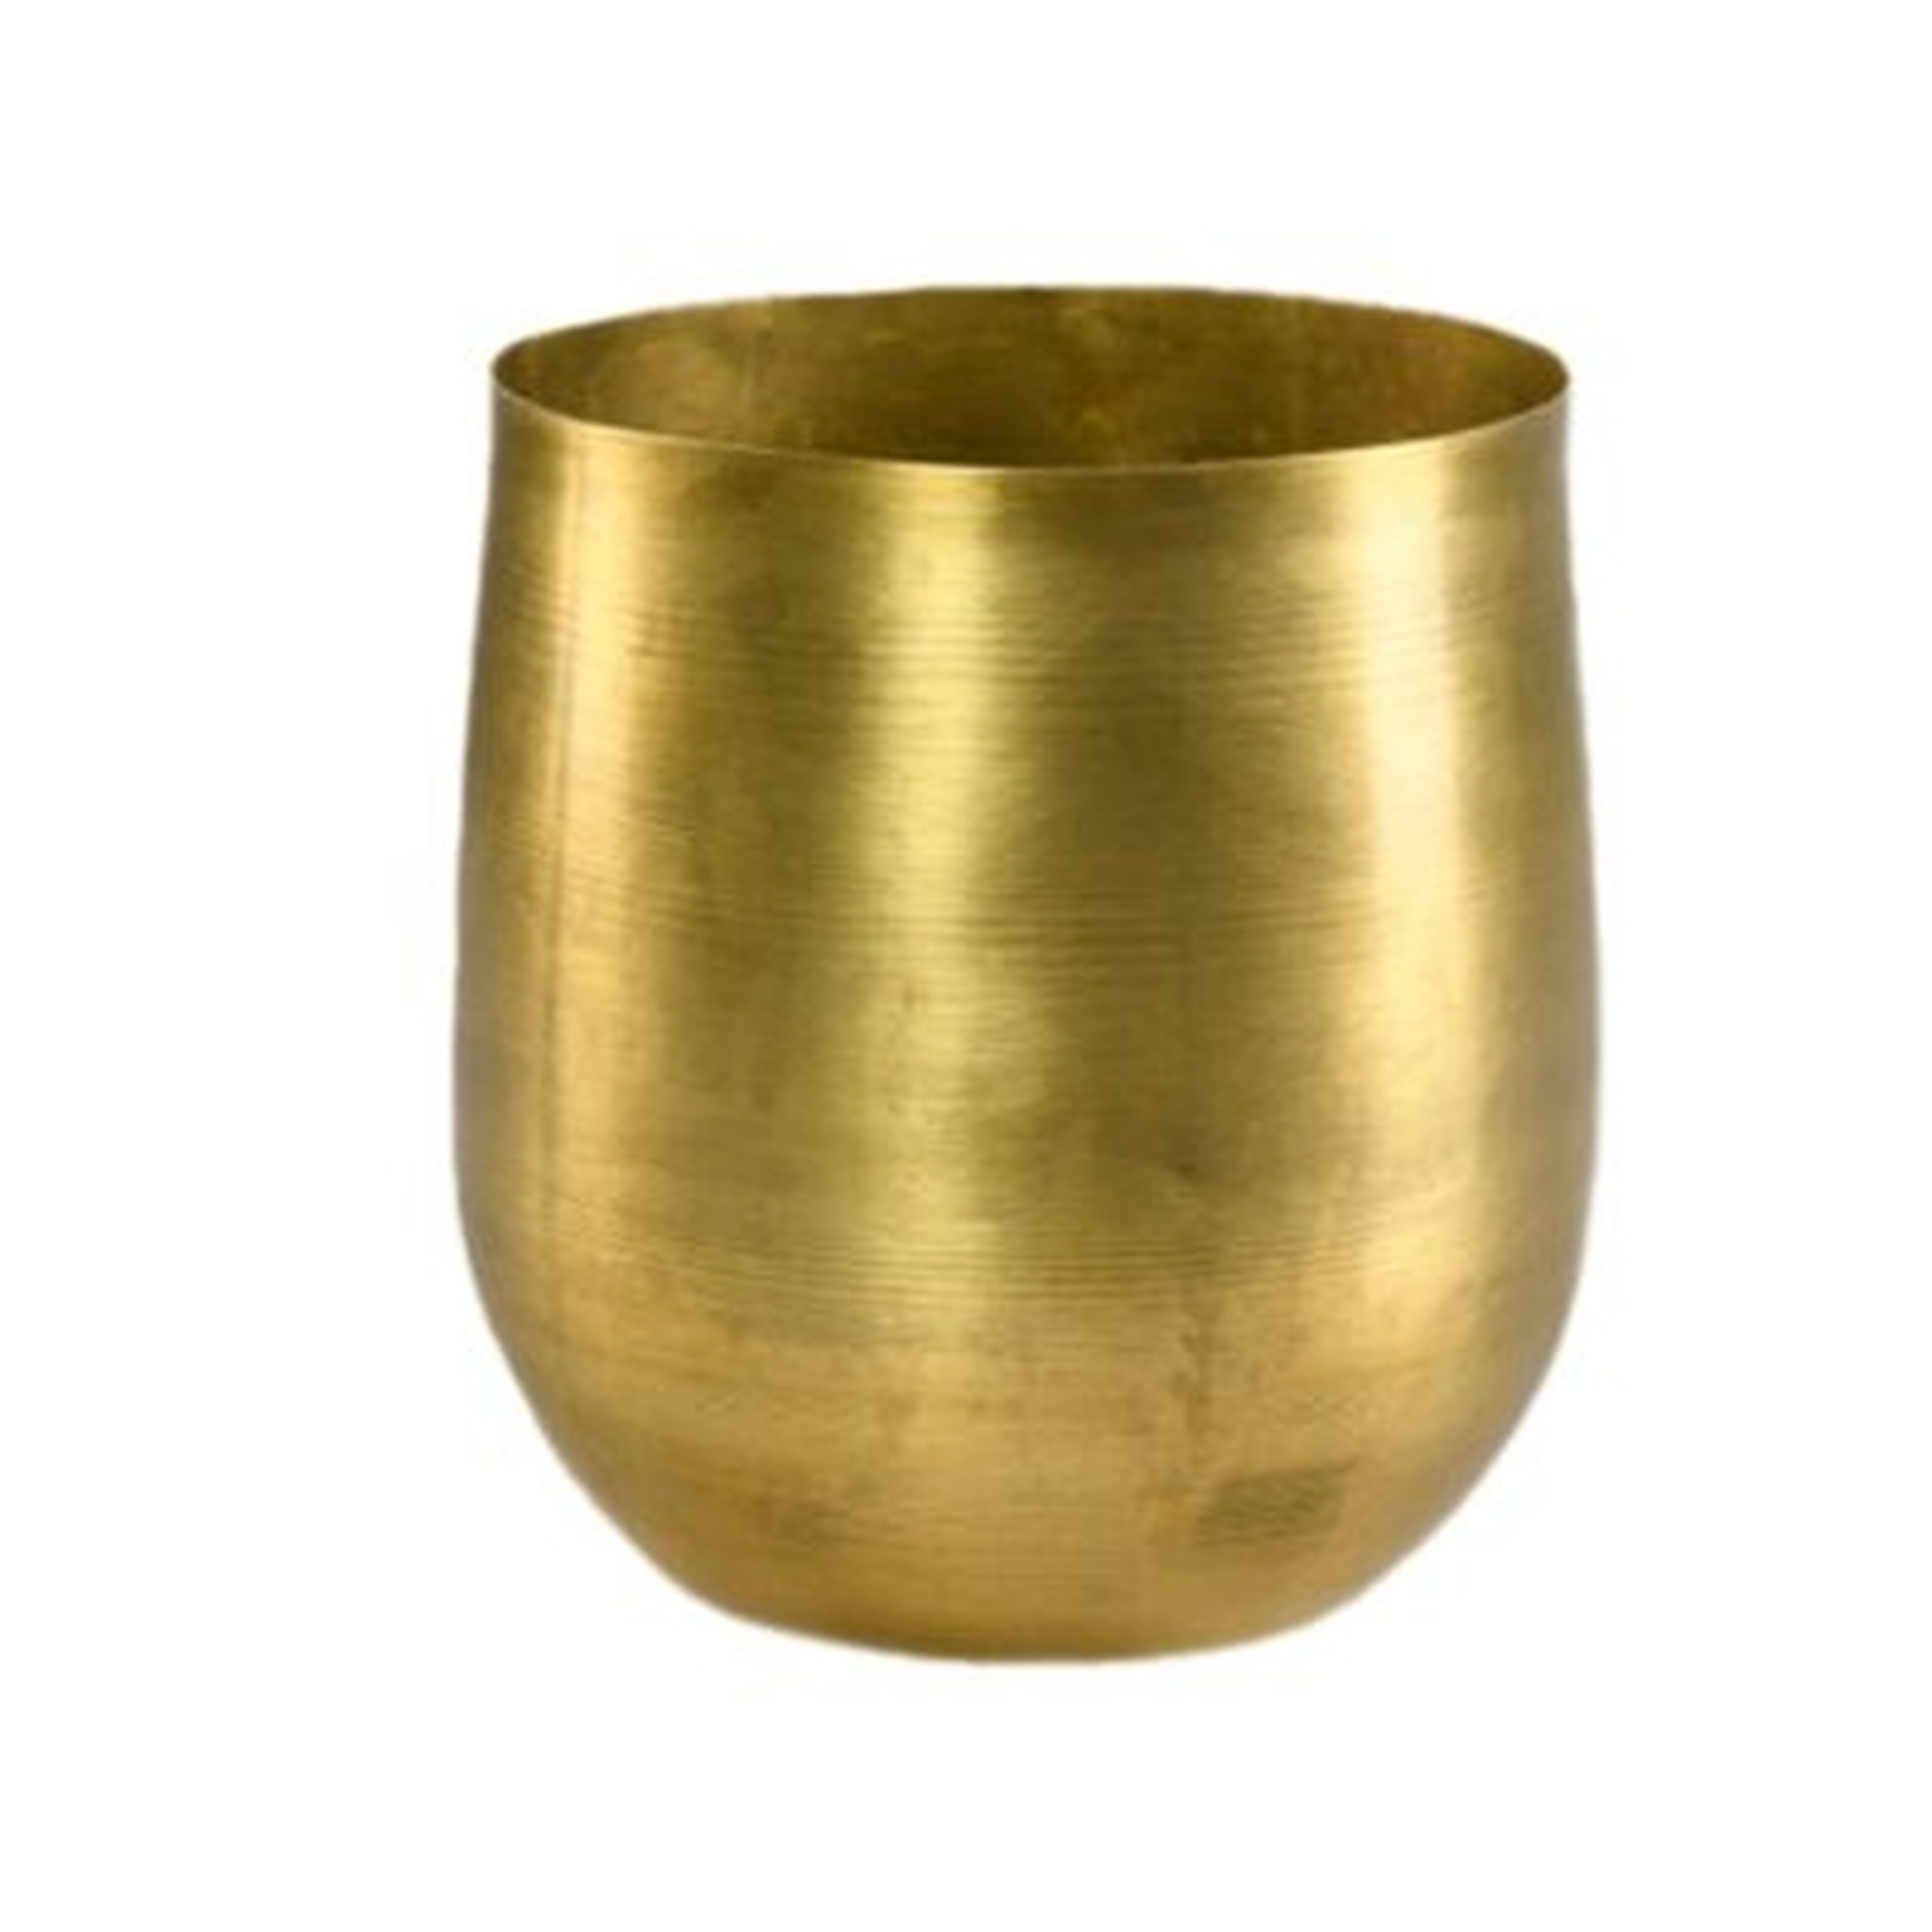 Mercer41 Raw Brass Vase, Brass Decorative Accents Use As Brass Planter For Plant, Gold Flower Vase For Wedding Or Event Centerpiece, Metallic Pot For Home, Measures 6" Tall & 5.5" Diameter - Wayfair